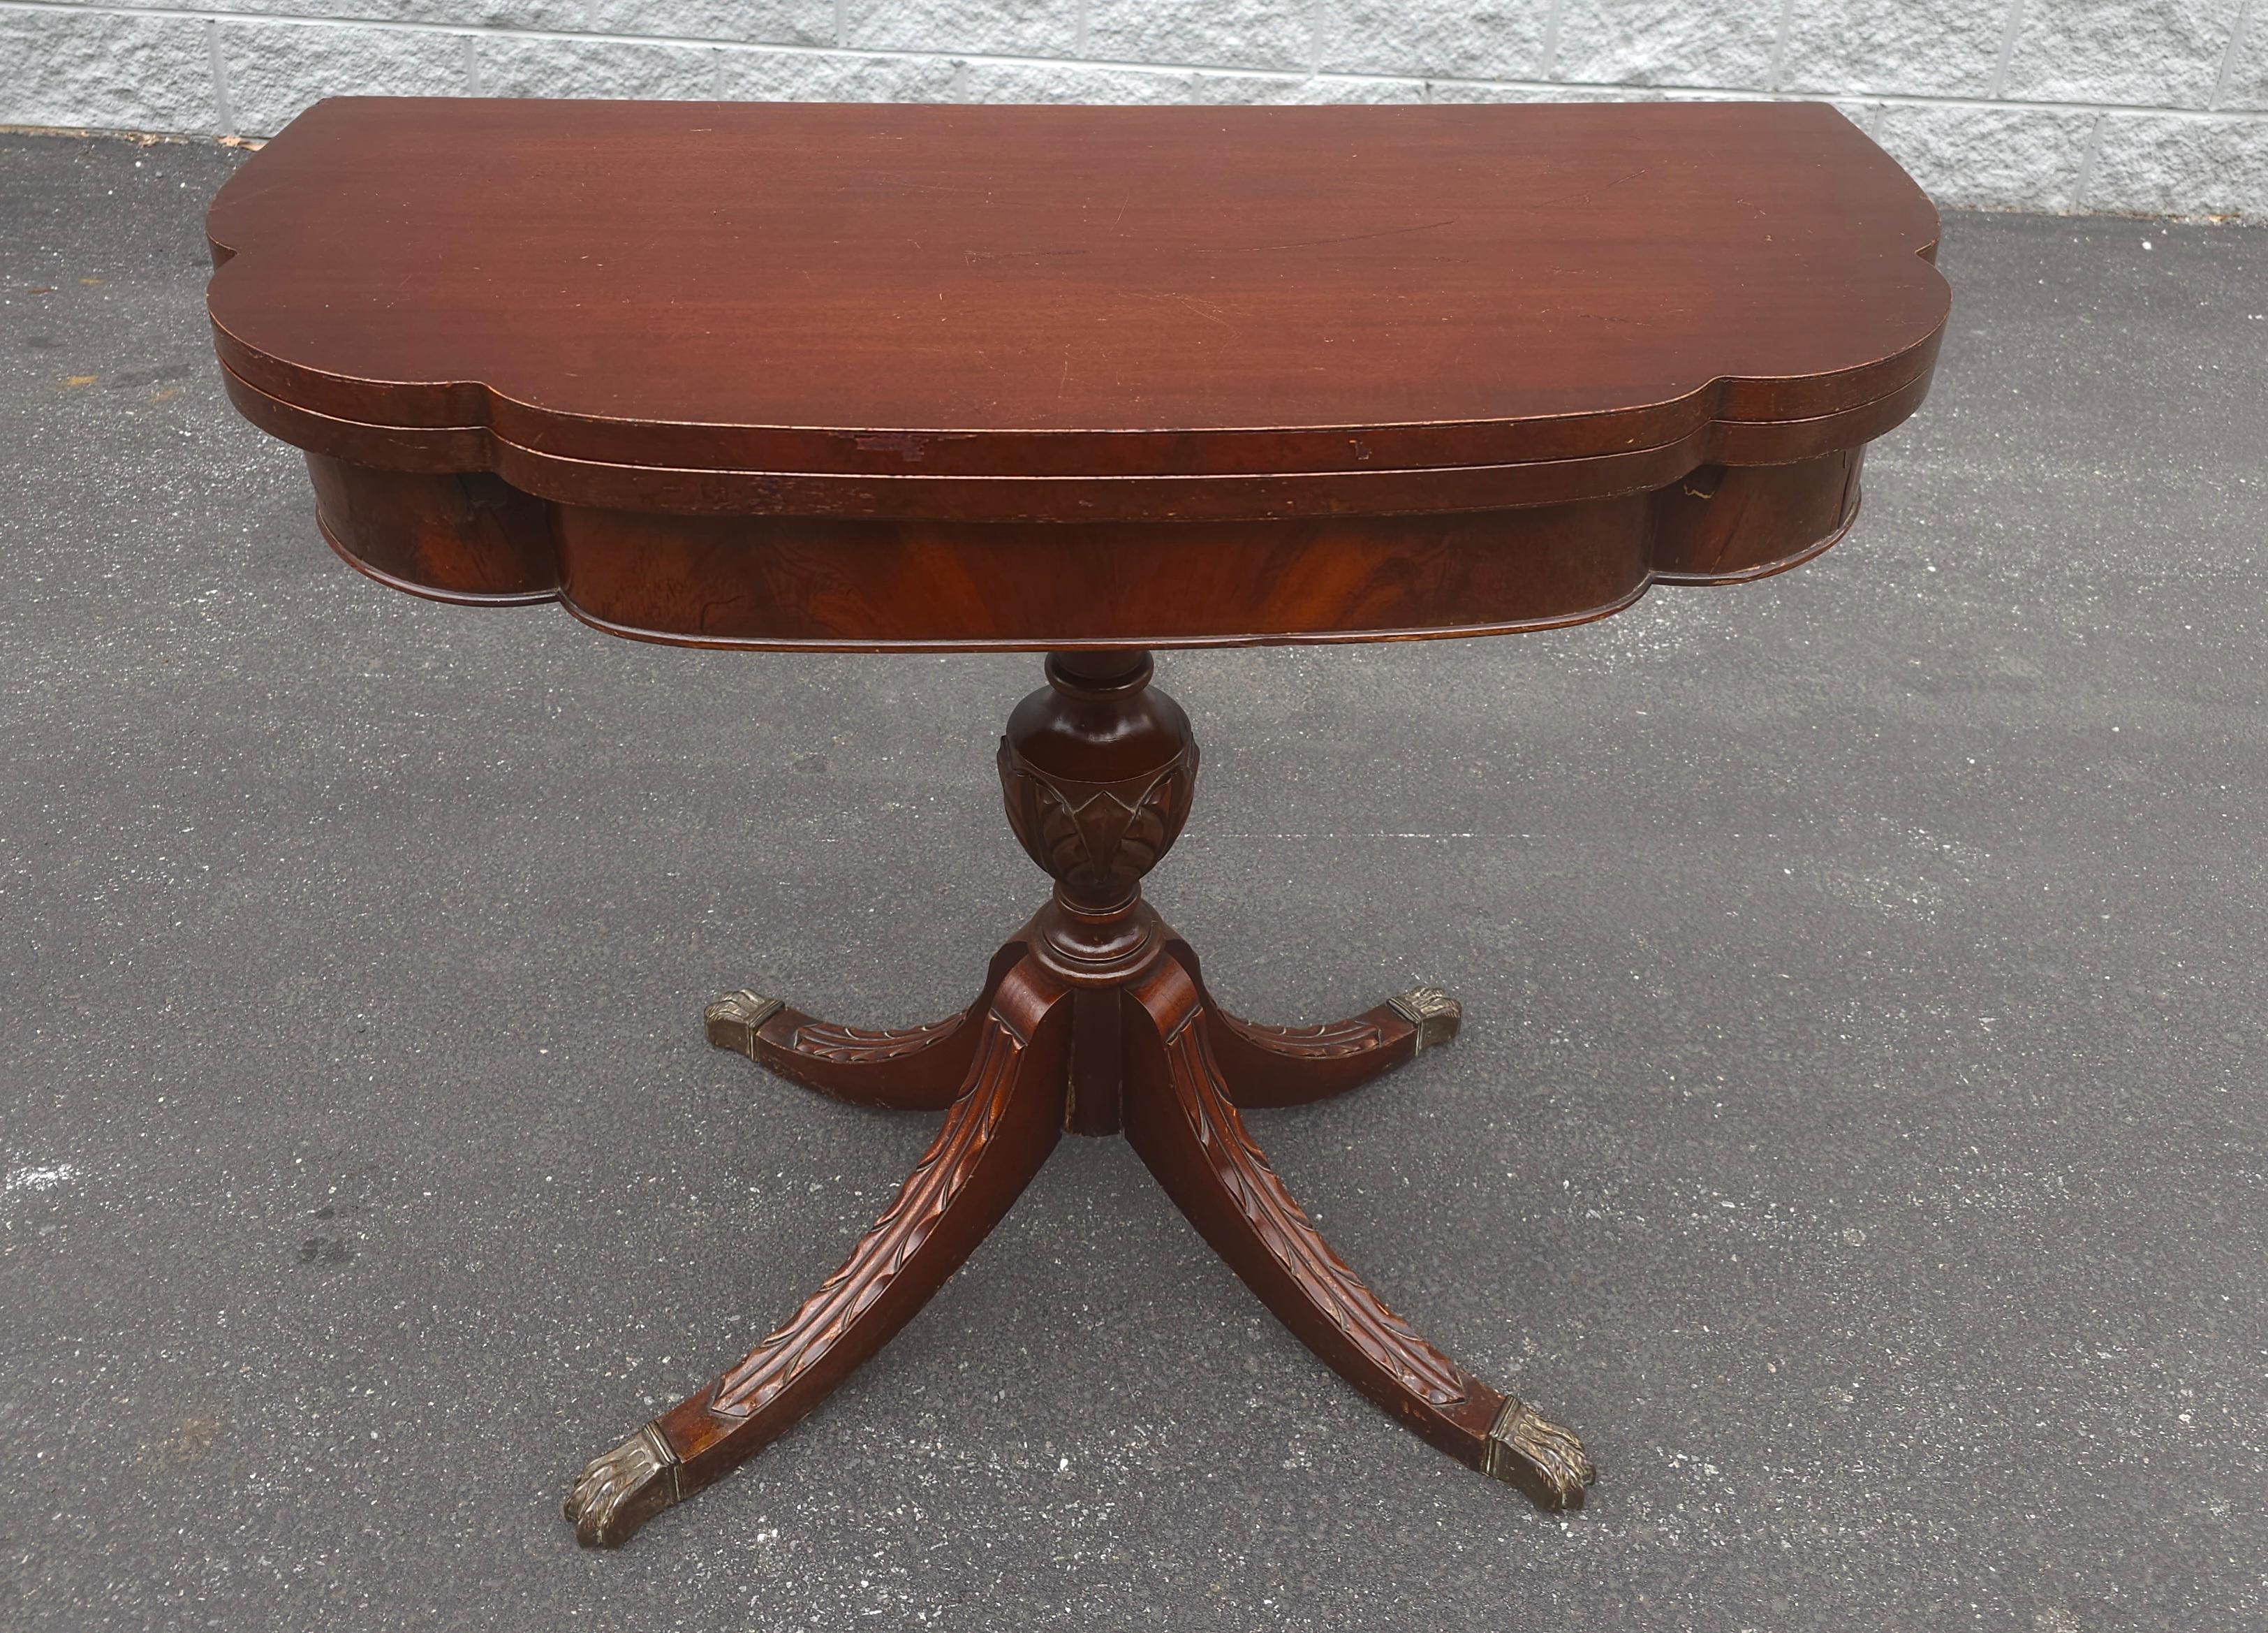 An Early 20th Century George III Style Mahogany Fold-Top Game Table Console Table with carved quad pod Pedestal and brass cap Paw Feet. Measures 36